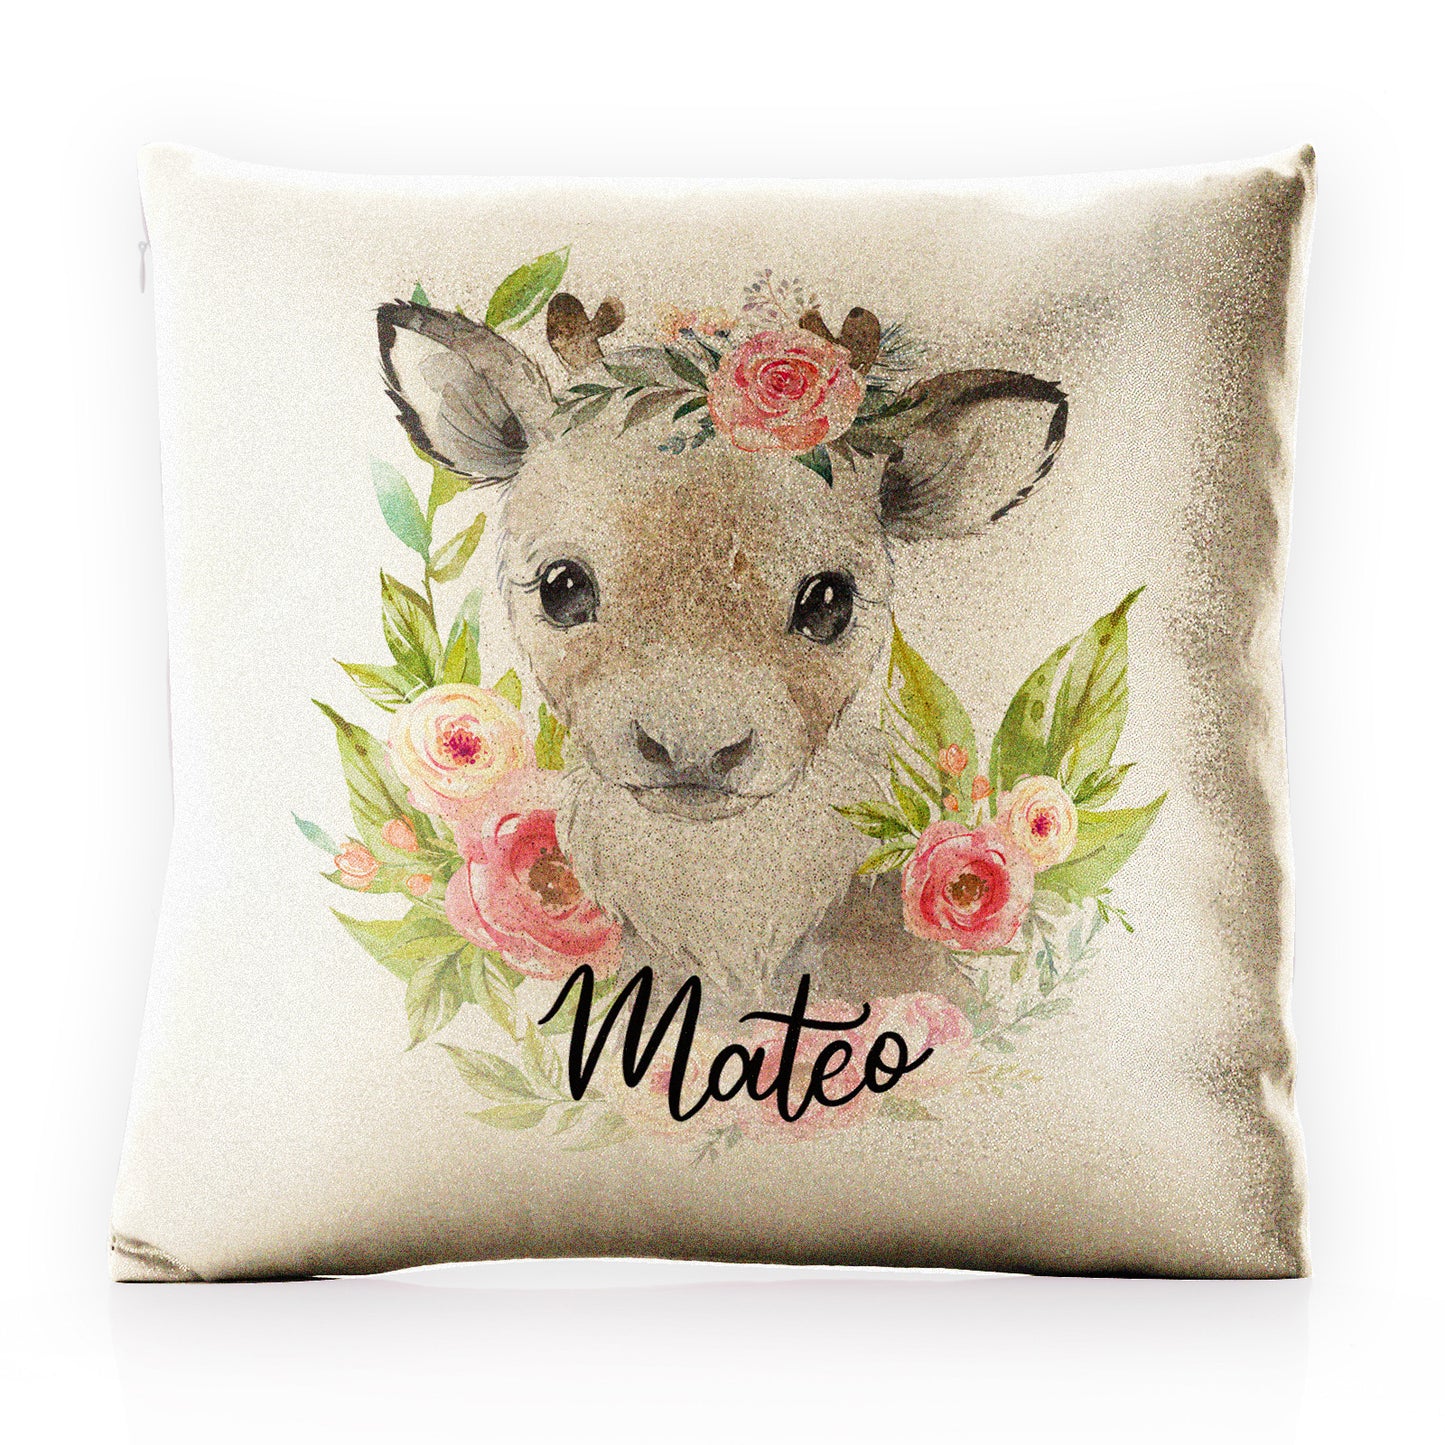 Personalised Glitter Cushion with Reindeer Pink Flowers and Cute Text